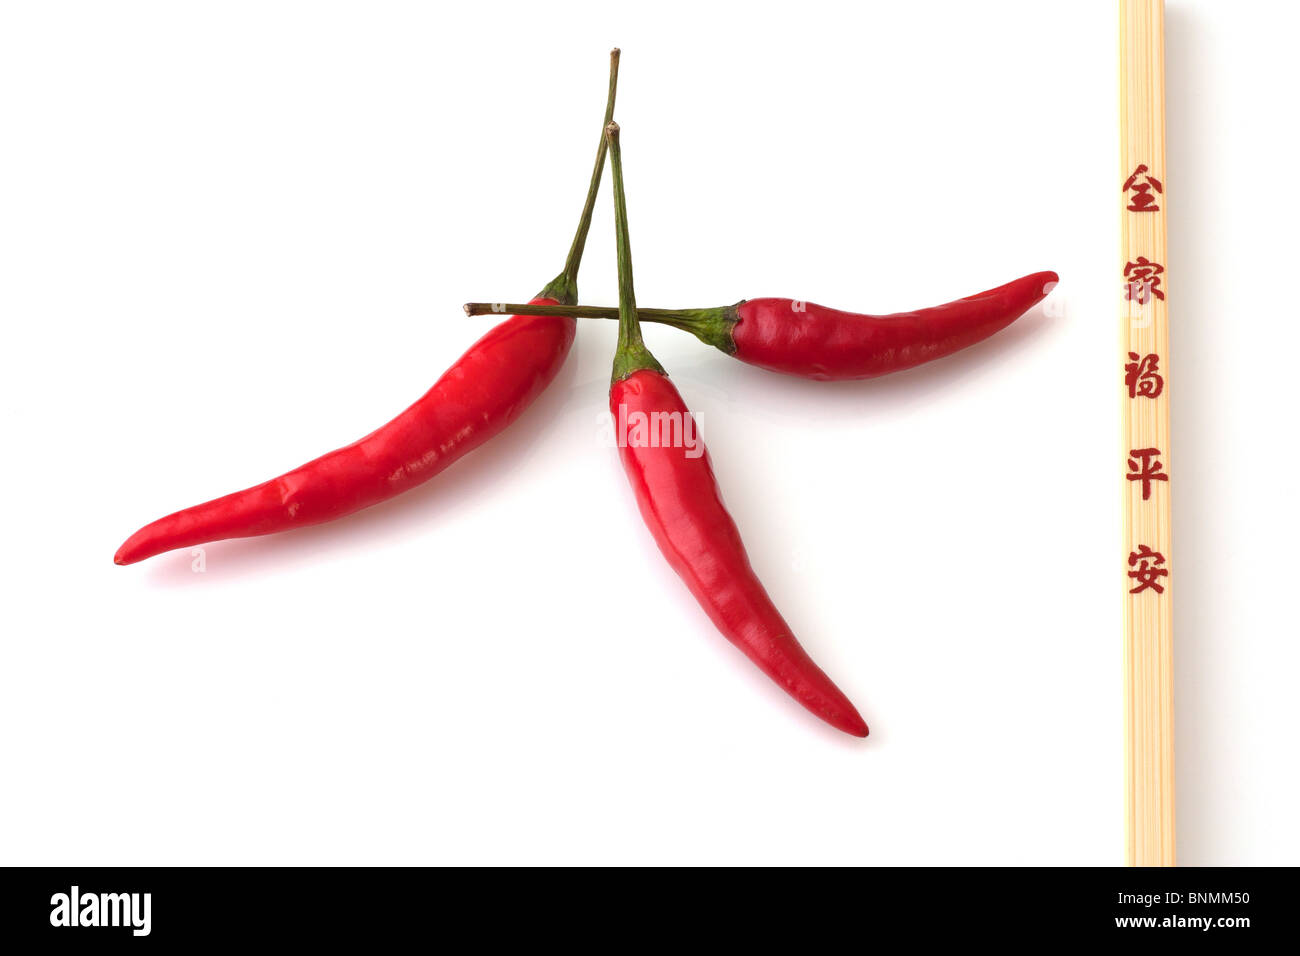 3 Chilli's and a chopstick Stock Photo